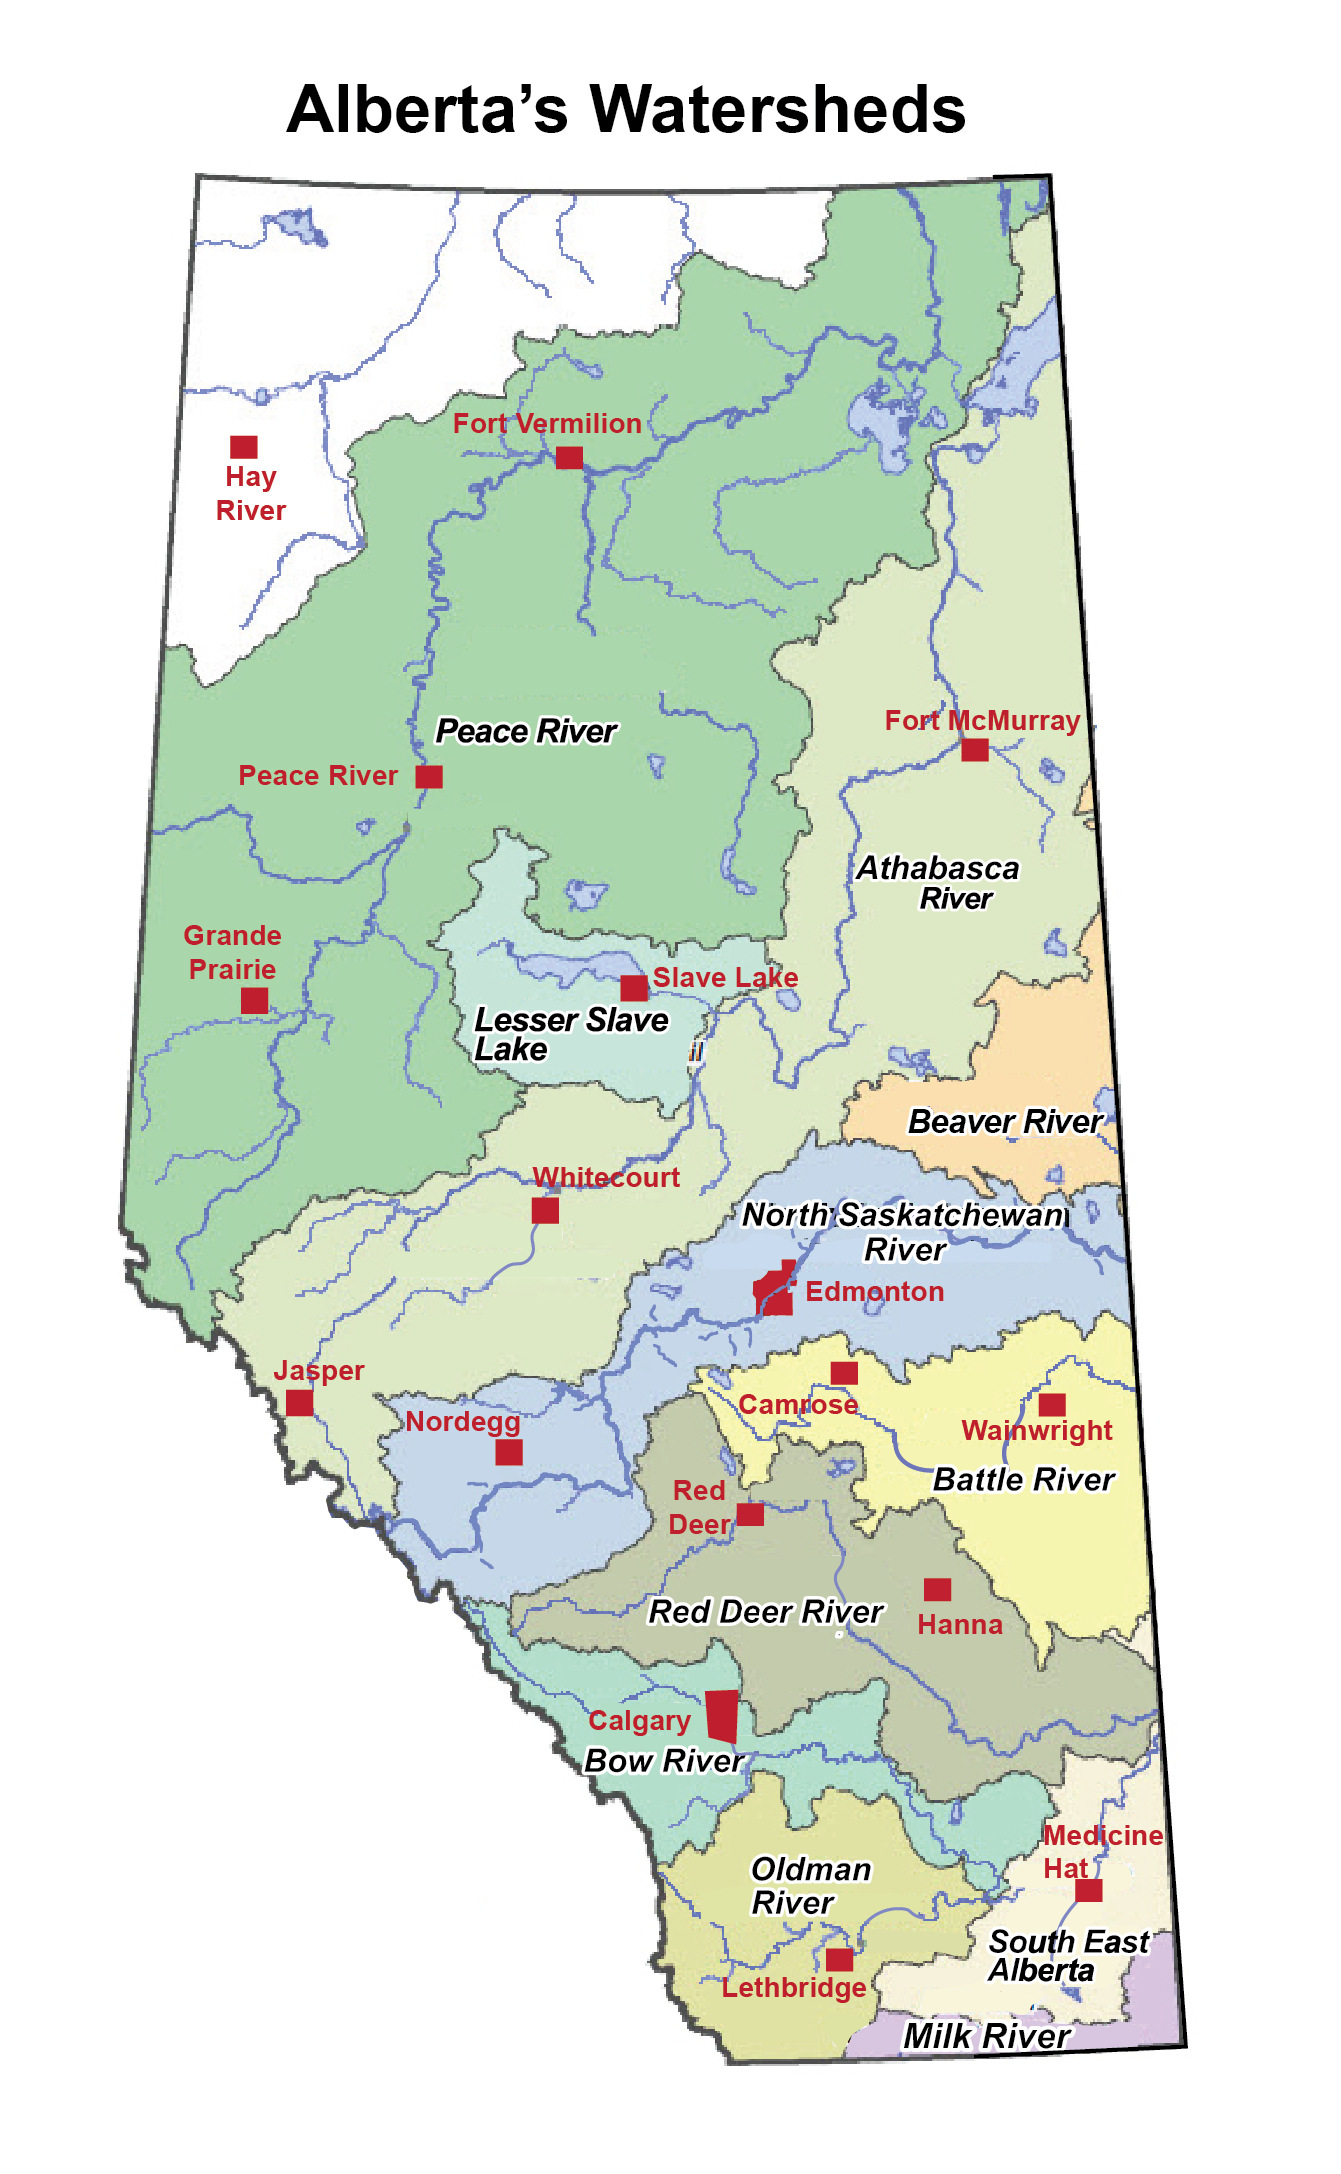 watershed-information-caring-for-our-watersheds